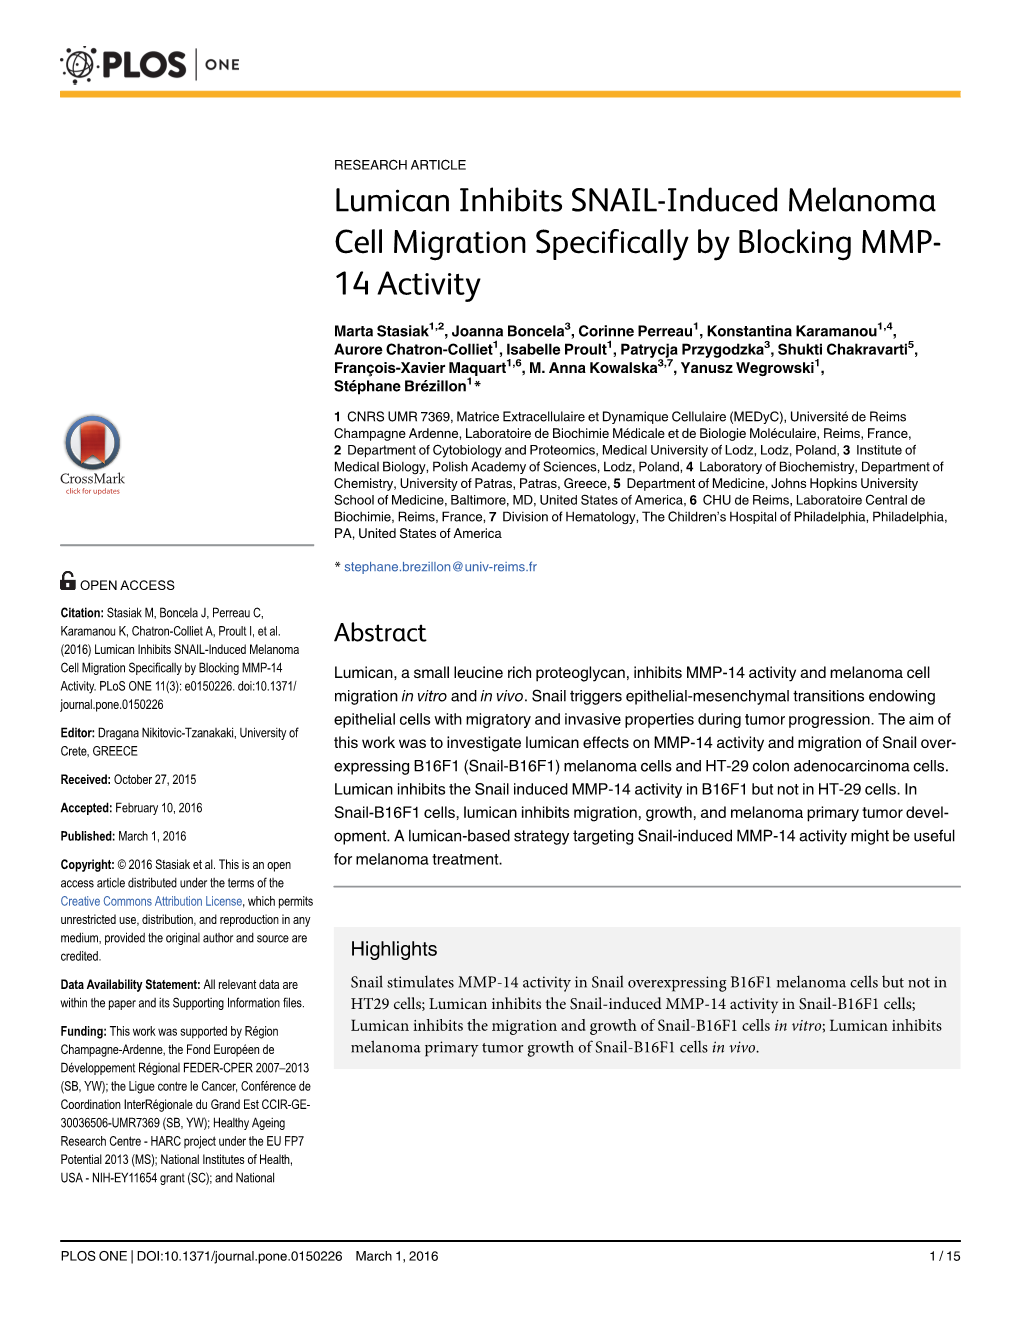 Lumican Inhibits SNAIL-Induced Melanoma Cell Migration Specifically by Blocking MMP-14 Activity